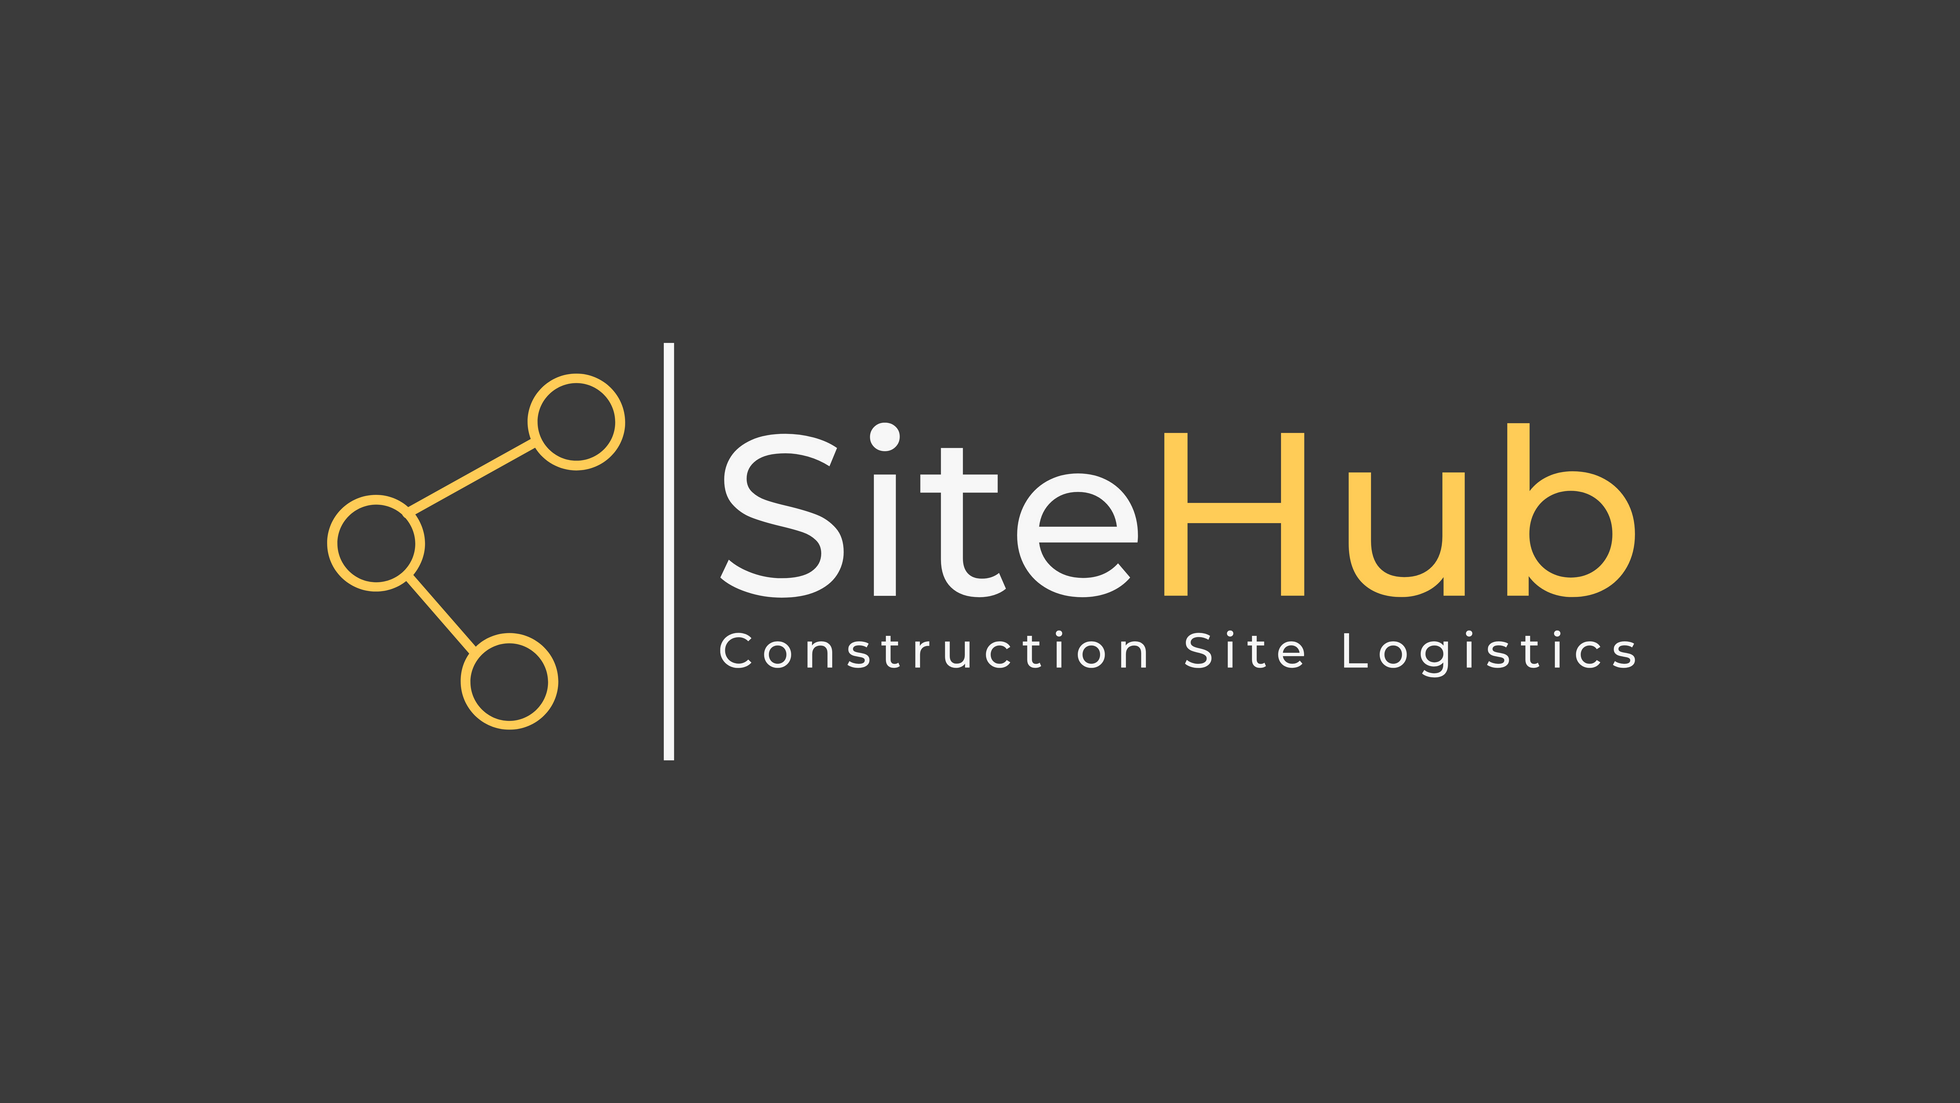 SiteHub - the story